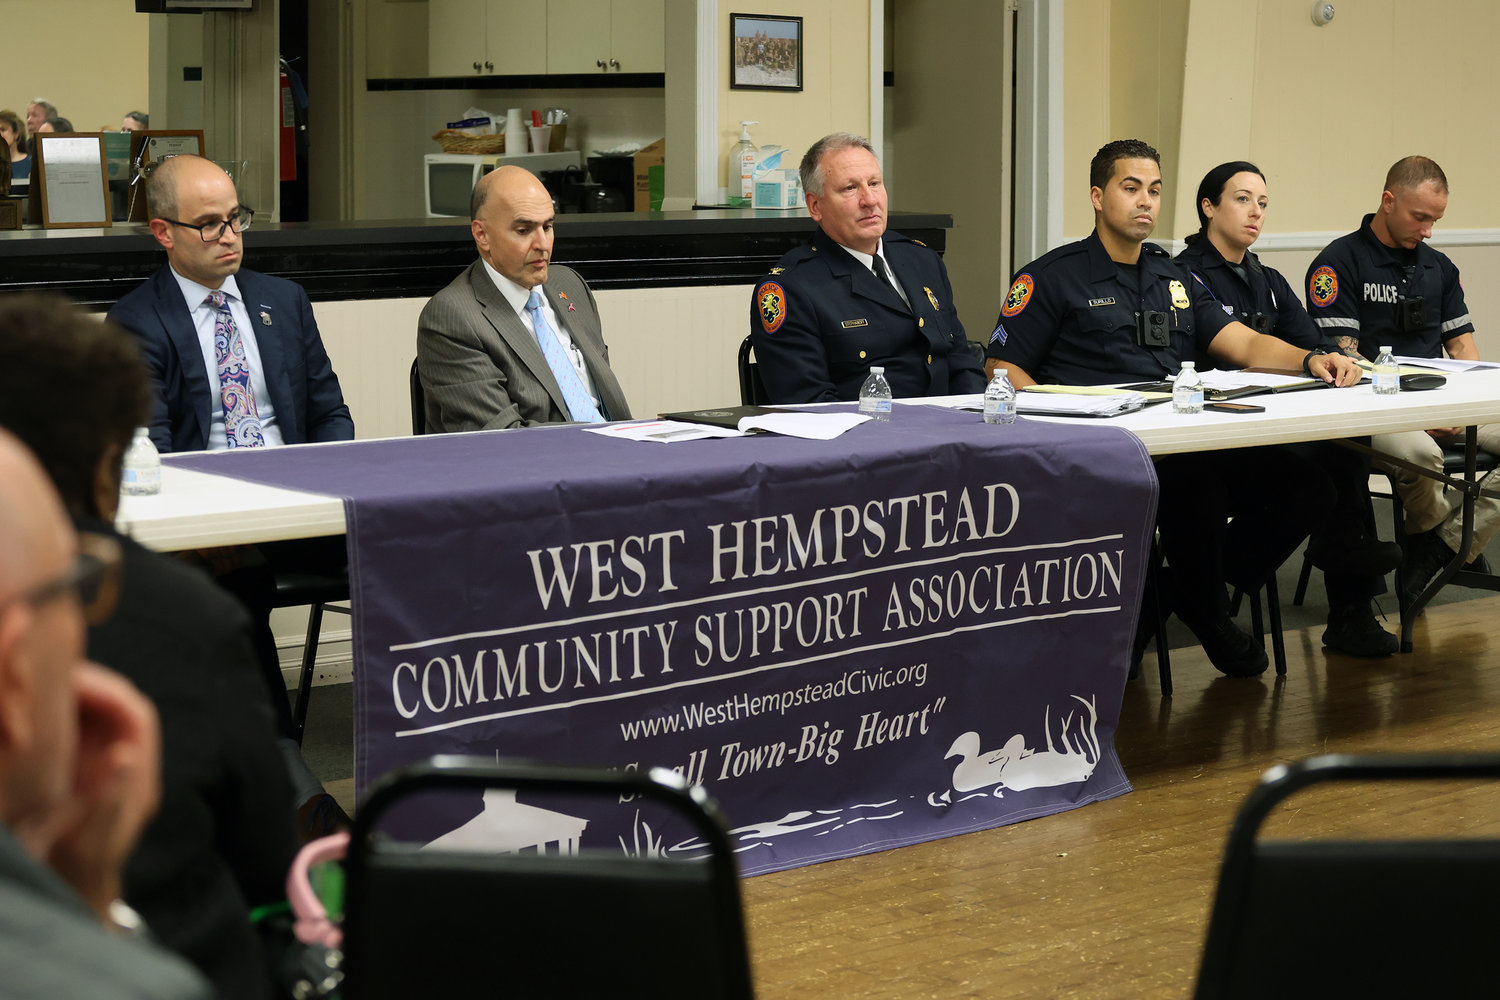 Assemblyman Ed Ra, Legislator John Giuffrè, NCPD Inspector Gregory Stephanoff and Officers Ryan Surillo, Angelica Caggiano and Mike Destefano fielded questions from West Hempstead residents concerned about traffic safety following a deadly accident.